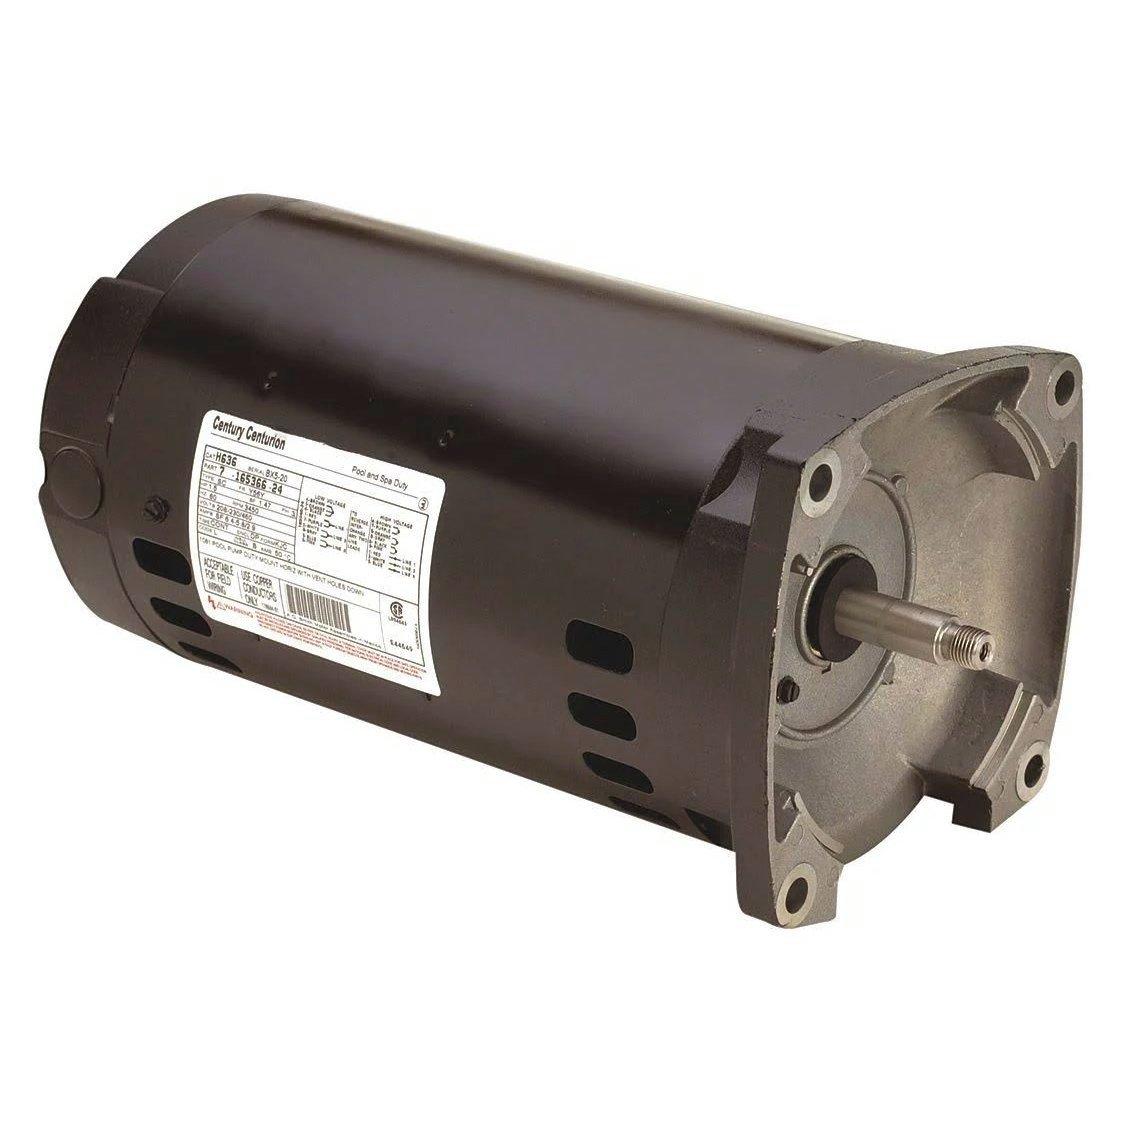 Century A.O. Smith - Centurion 56Y Square Flange 1/2 HP Three Phase Pool and Spa Motor